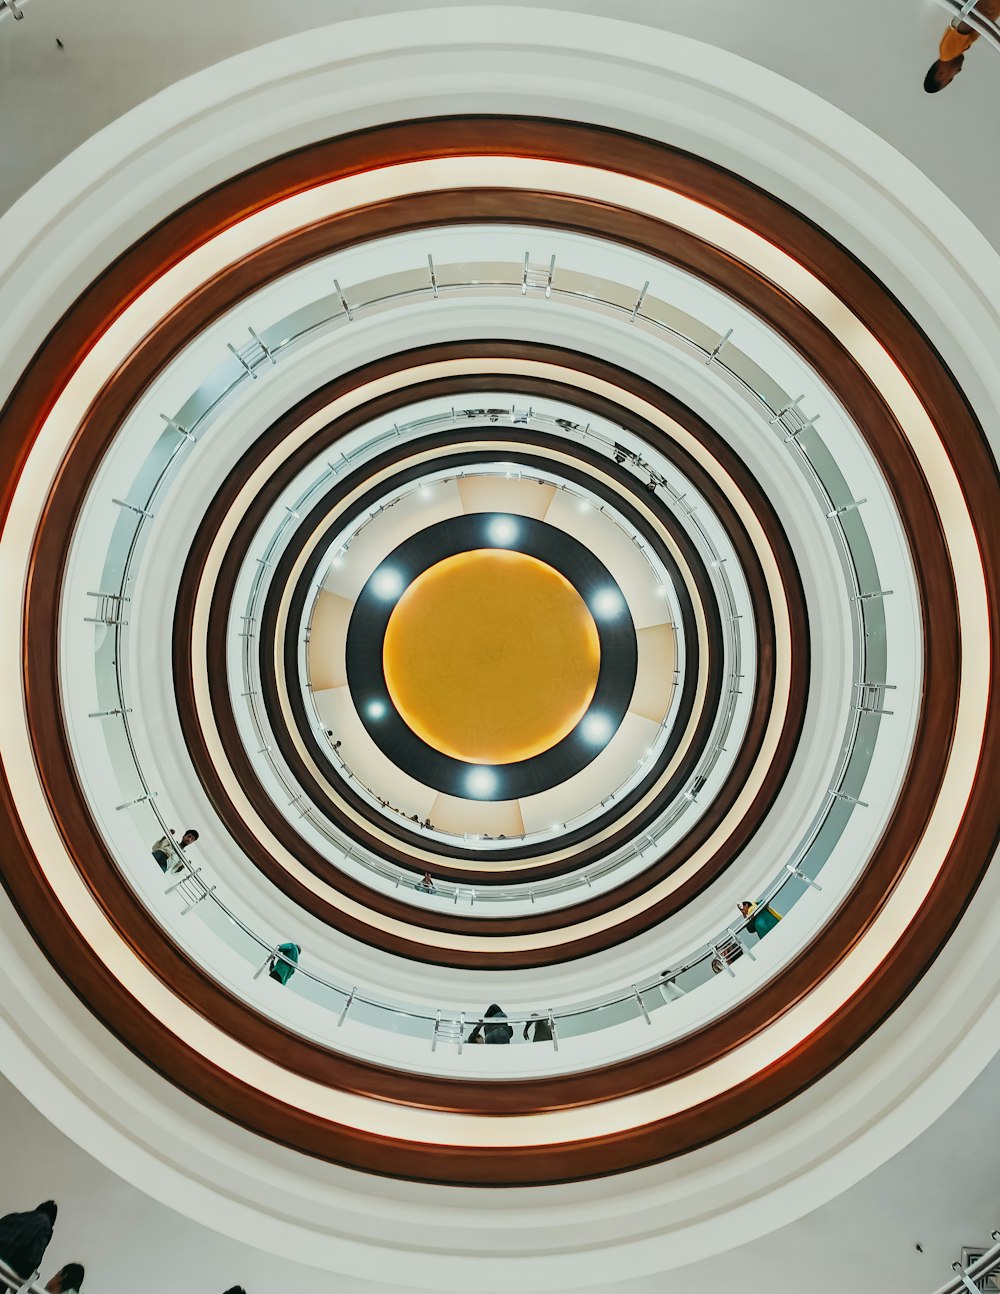 an overhead view of a circular ceiling in a building